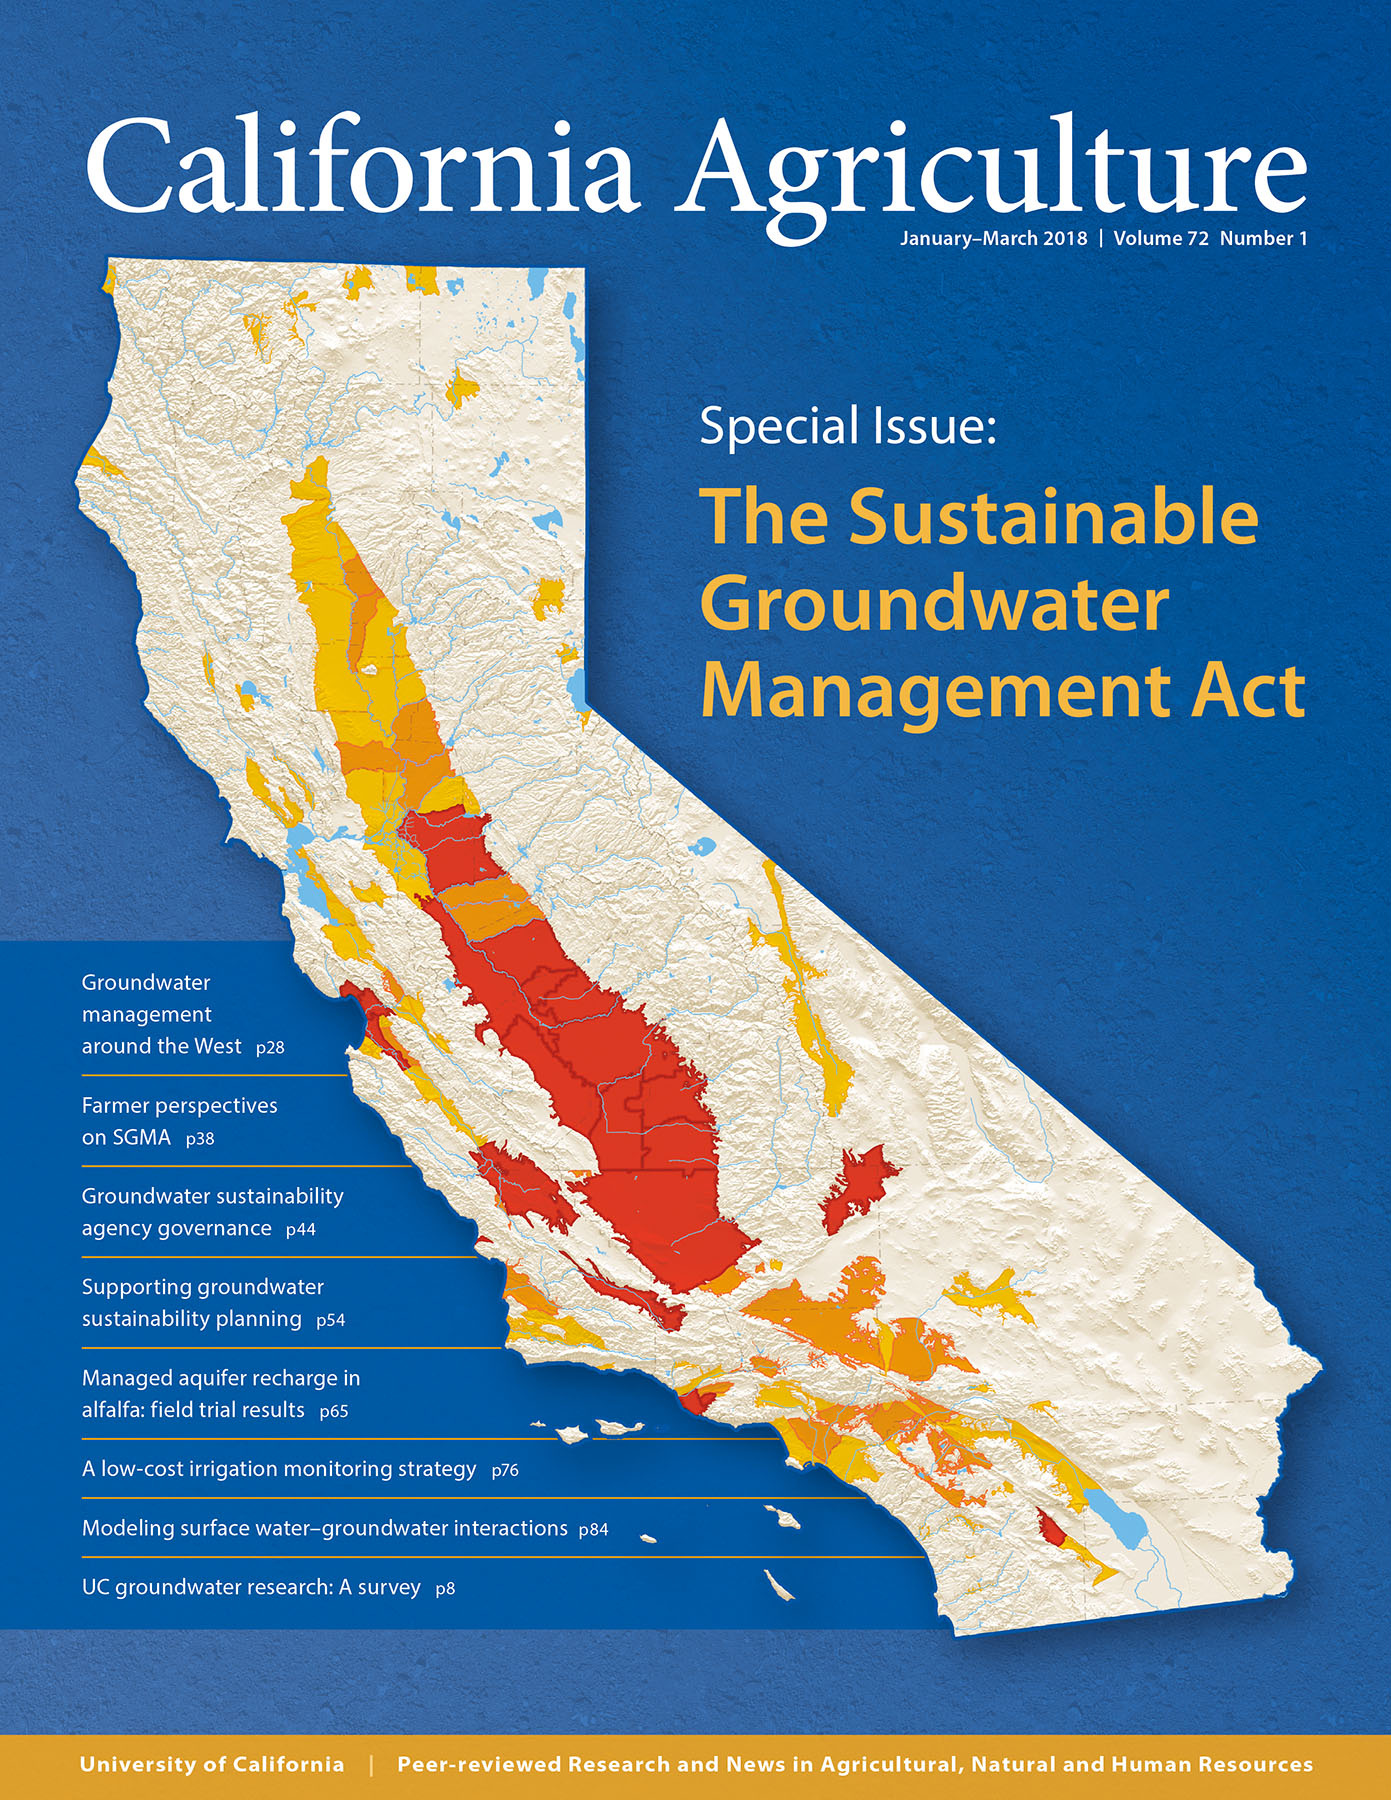 Corrected cover for January-March 2018 California Agriculture